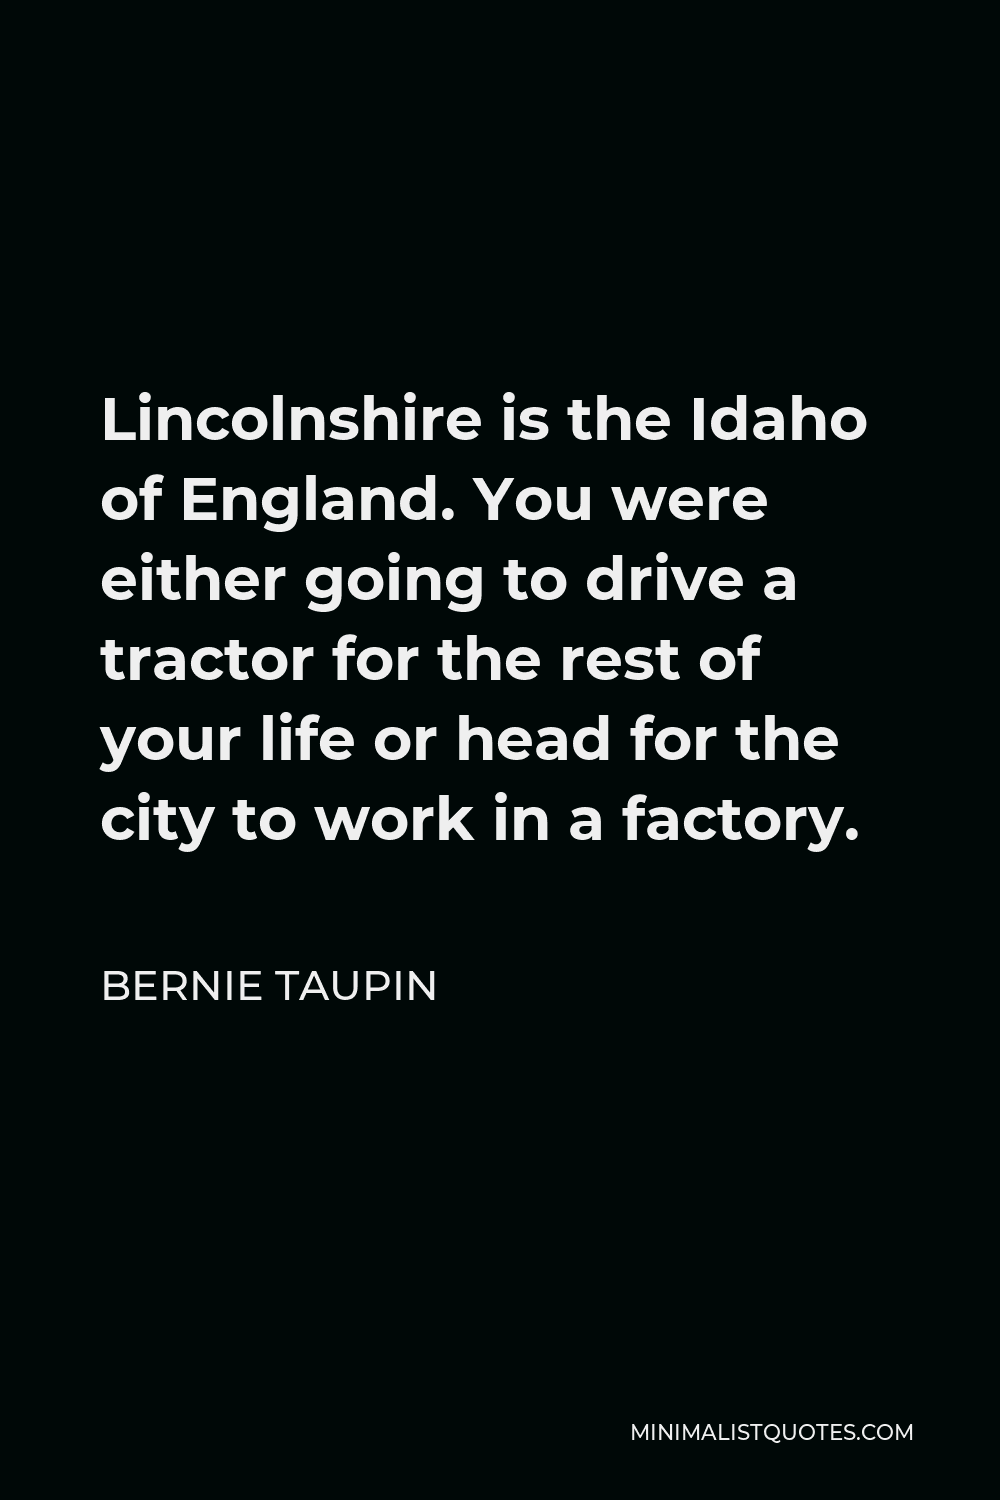 Bernie Taupin Quote - Lincolnshire is the Idaho of England. You were either going to drive a tractor for the rest of your life or head for the city to work in a factory.